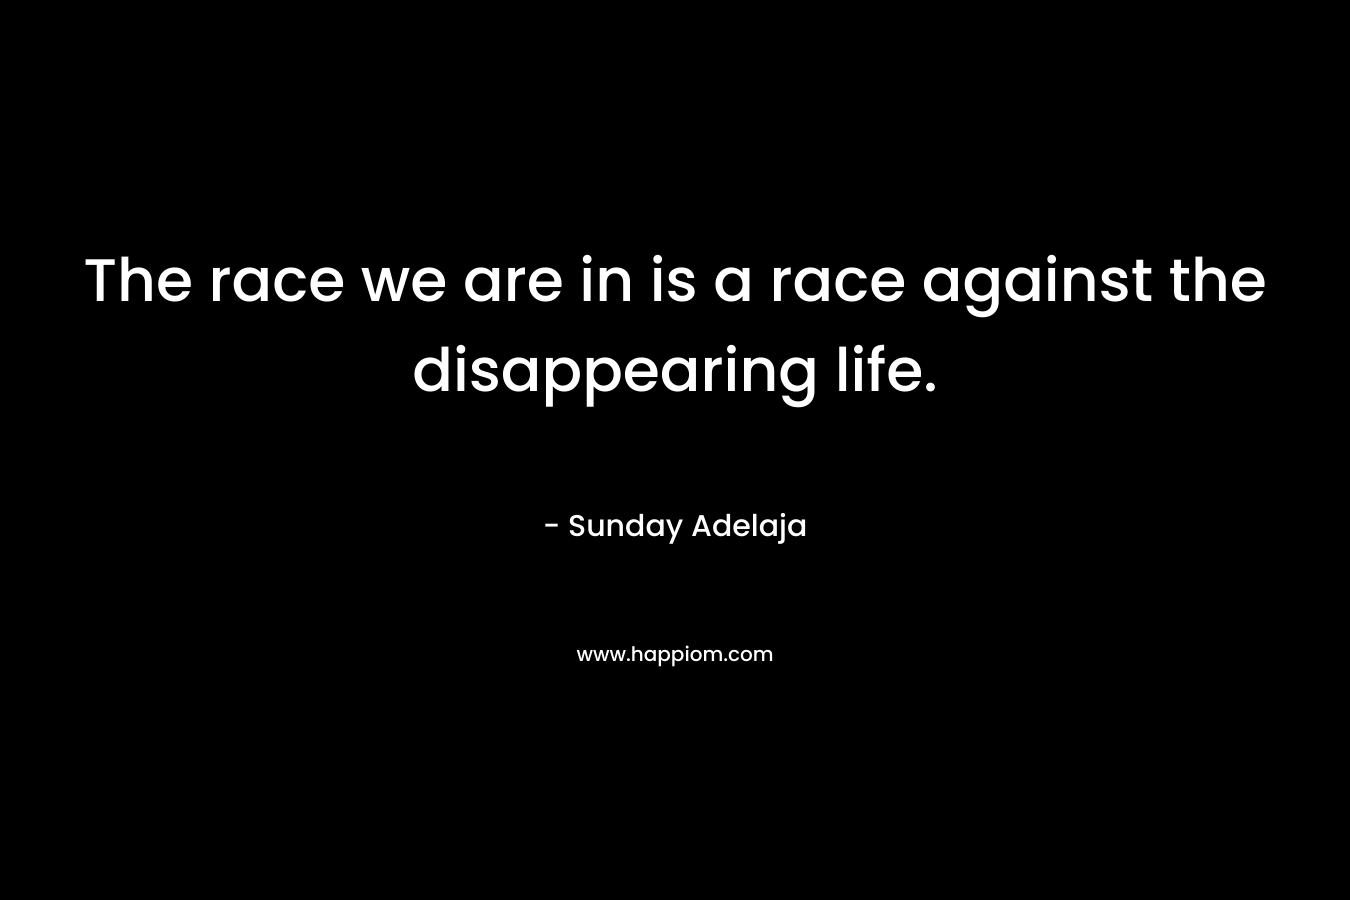 The race we are in is a race against the disappearing life.